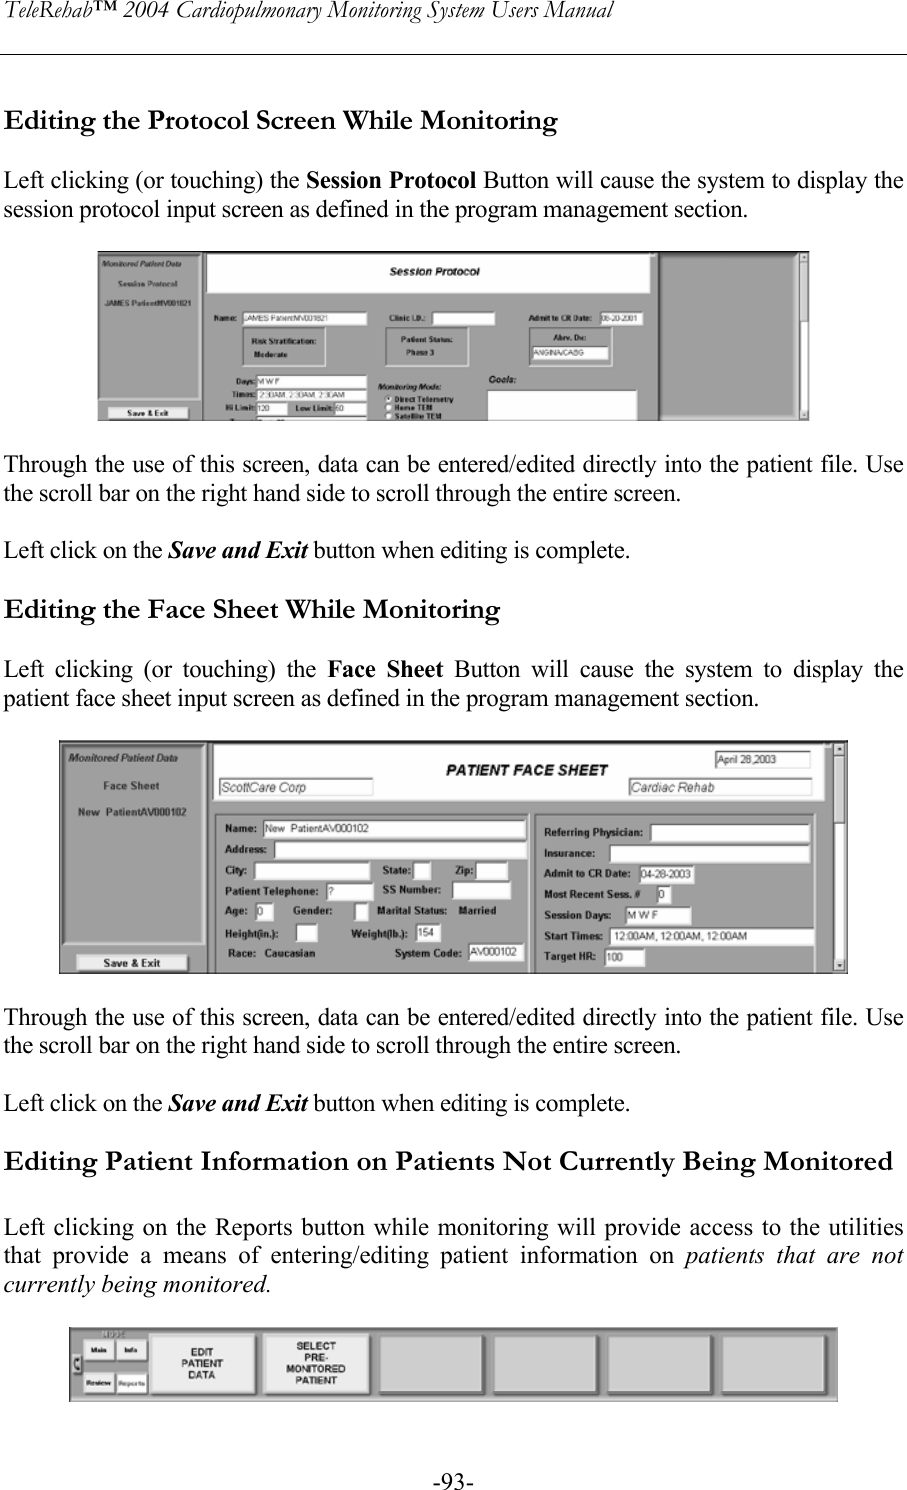 TeleRehab™ 2004 Cardiopulmonary Monitoring System Users Manual    -93- Editing the Protocol Screen While Monitoring  Left clicking (or touching) the Session Protocol Button will cause the system to display the session protocol input screen as defined in the program management section.    Through the use of this screen, data can be entered/edited directly into the patient file. Use the scroll bar on the right hand side to scroll through the entire screen.  Left click on the Save and Exit button when editing is complete.  Editing the Face Sheet While Monitoring  Left clicking (or touching) the Face Sheet Button will cause the system to display the patient face sheet input screen as defined in the program management section.    Through the use of this screen, data can be entered/edited directly into the patient file. Use the scroll bar on the right hand side to scroll through the entire screen.  Left click on the Save and Exit button when editing is complete.  Editing Patient Information on Patients Not Currently Being Monitored  Left clicking on the Reports button while monitoring will provide access to the utilities that provide a means of entering/editing patient information on patients that are not currently being monitored.   